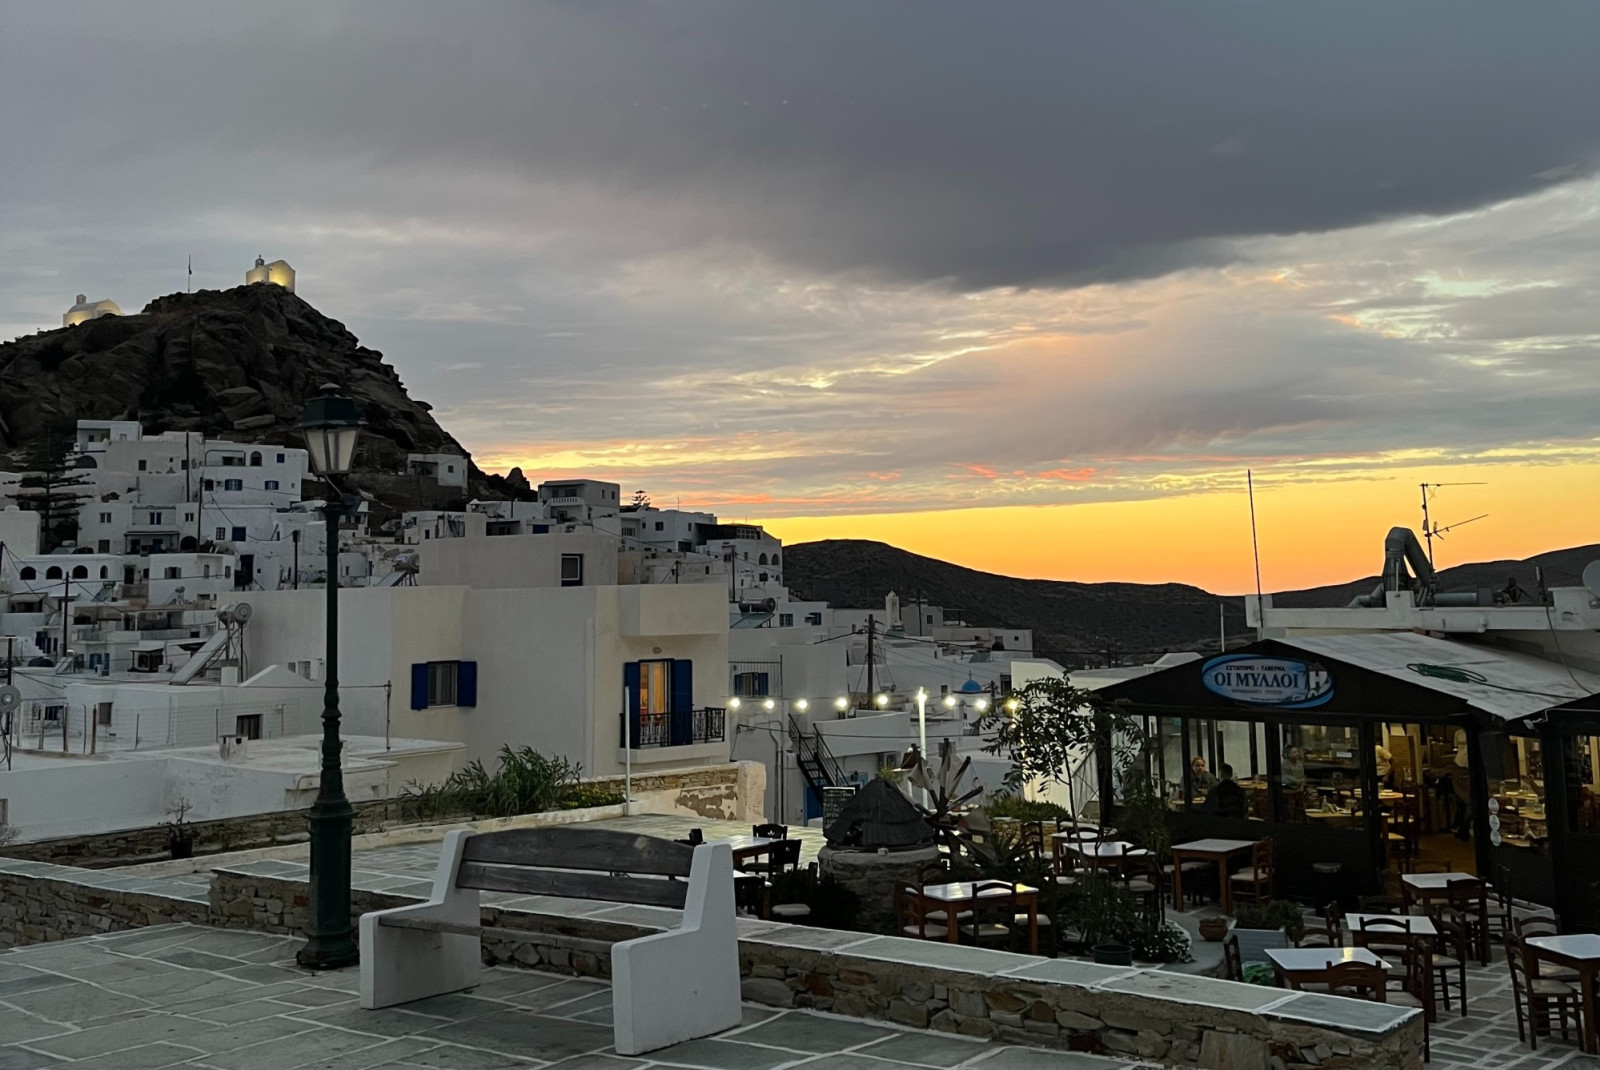 Sunset in cloudy sky from island town with white stone buildings in Ios, Greece.